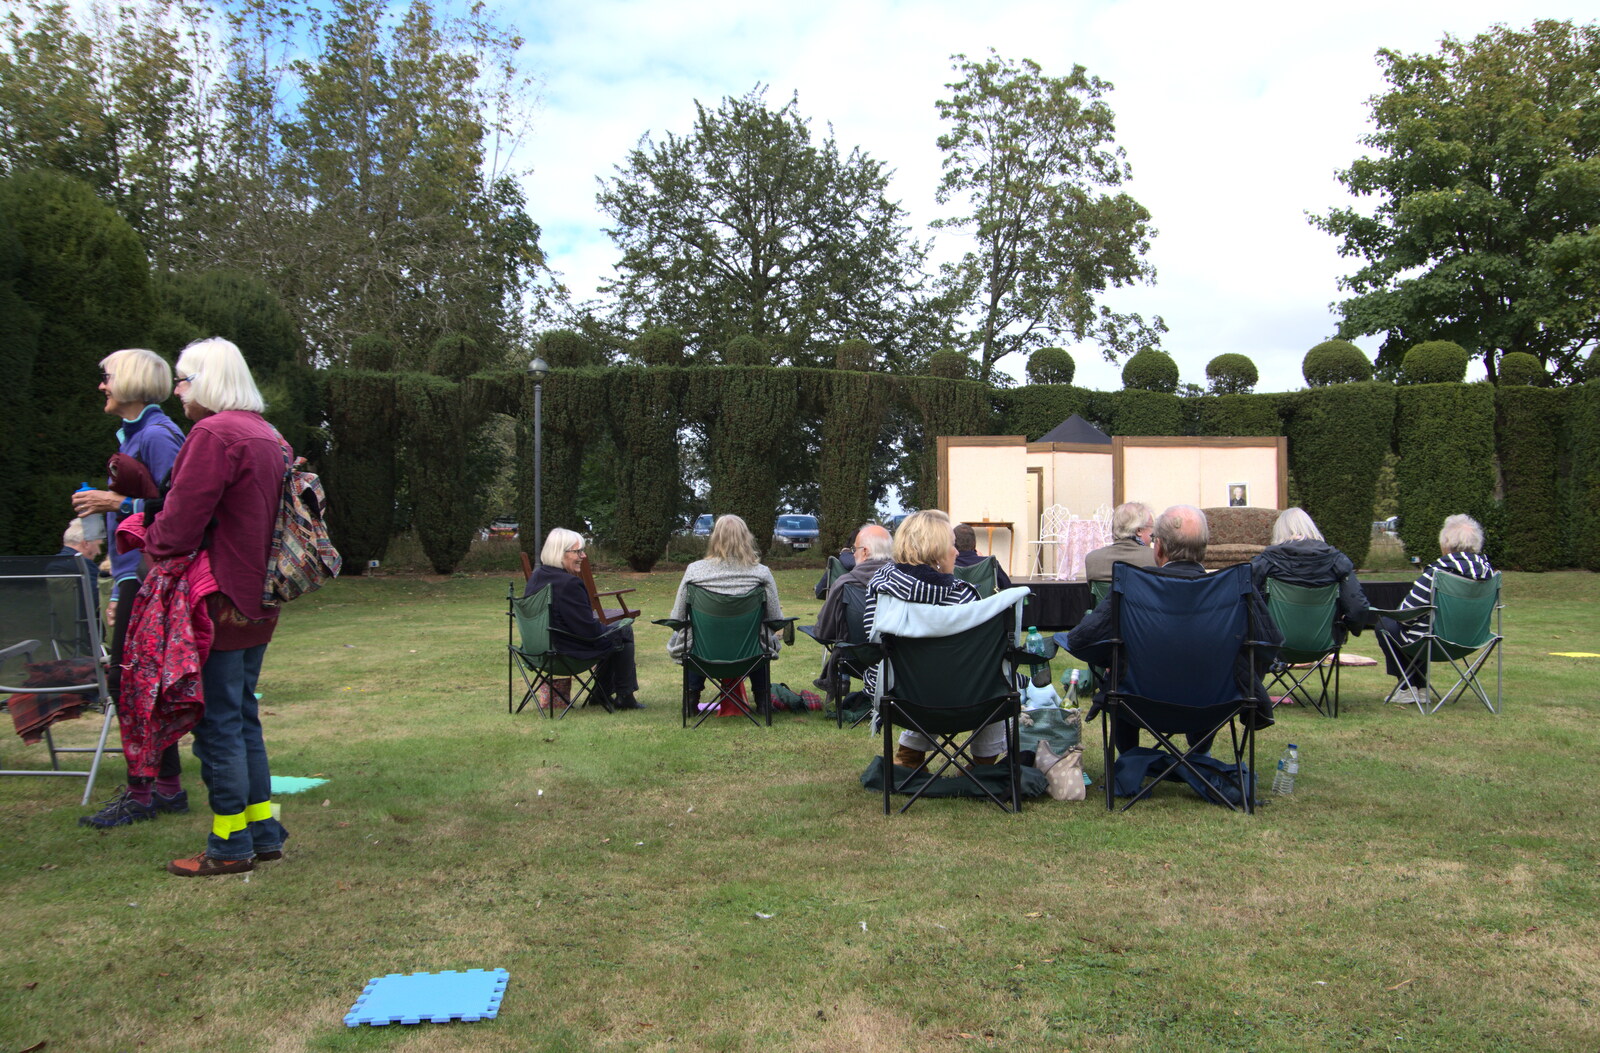 Camping at Three Rivers, Geldeston, Norfolk - 5th September 2020: The audience starts to arrive